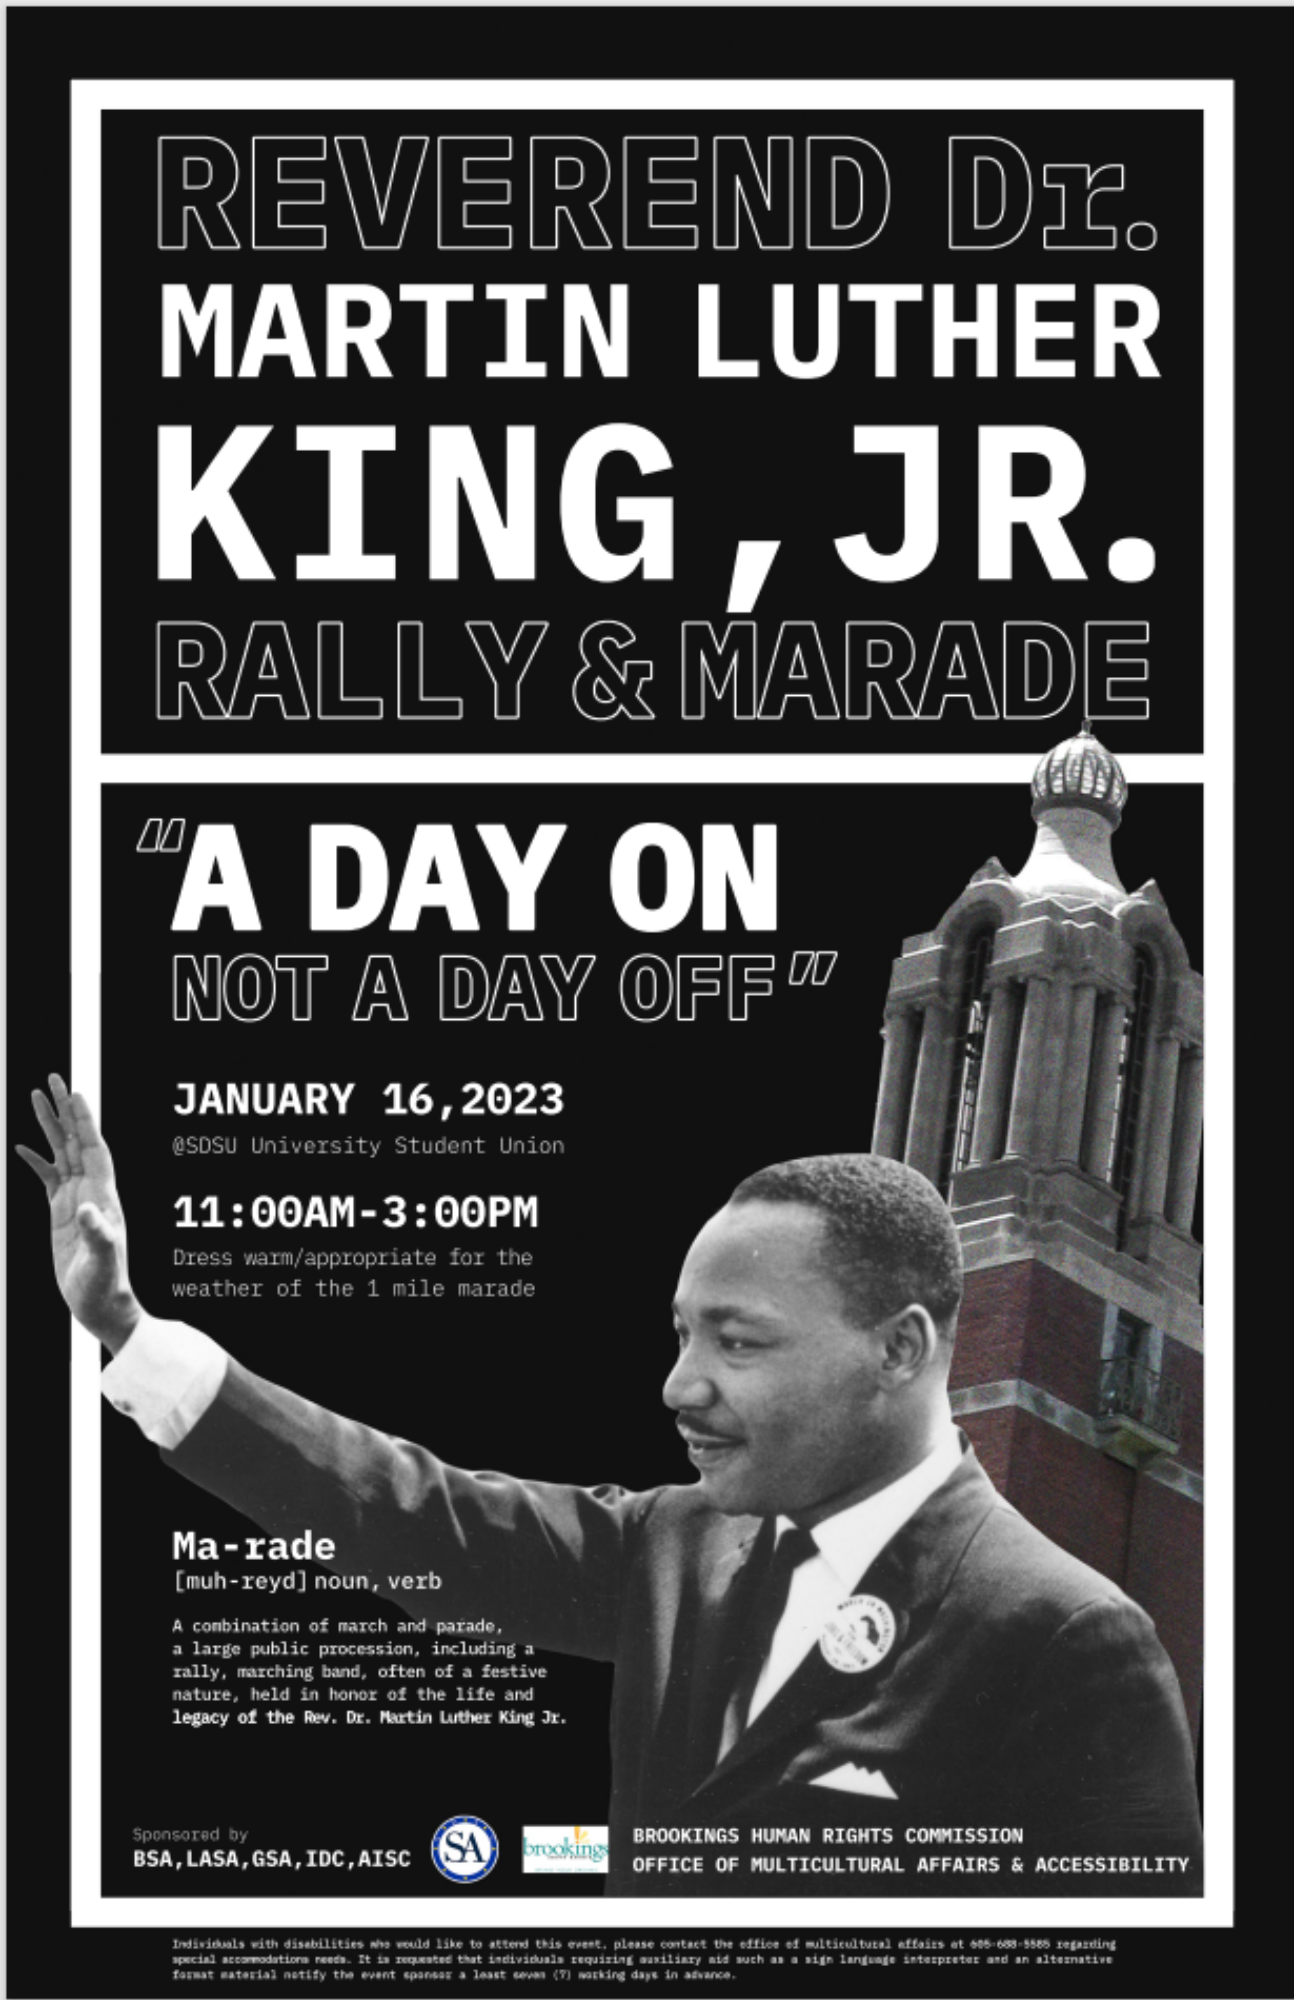 Dr. Martin Luther King, Jr. Rally and Marade